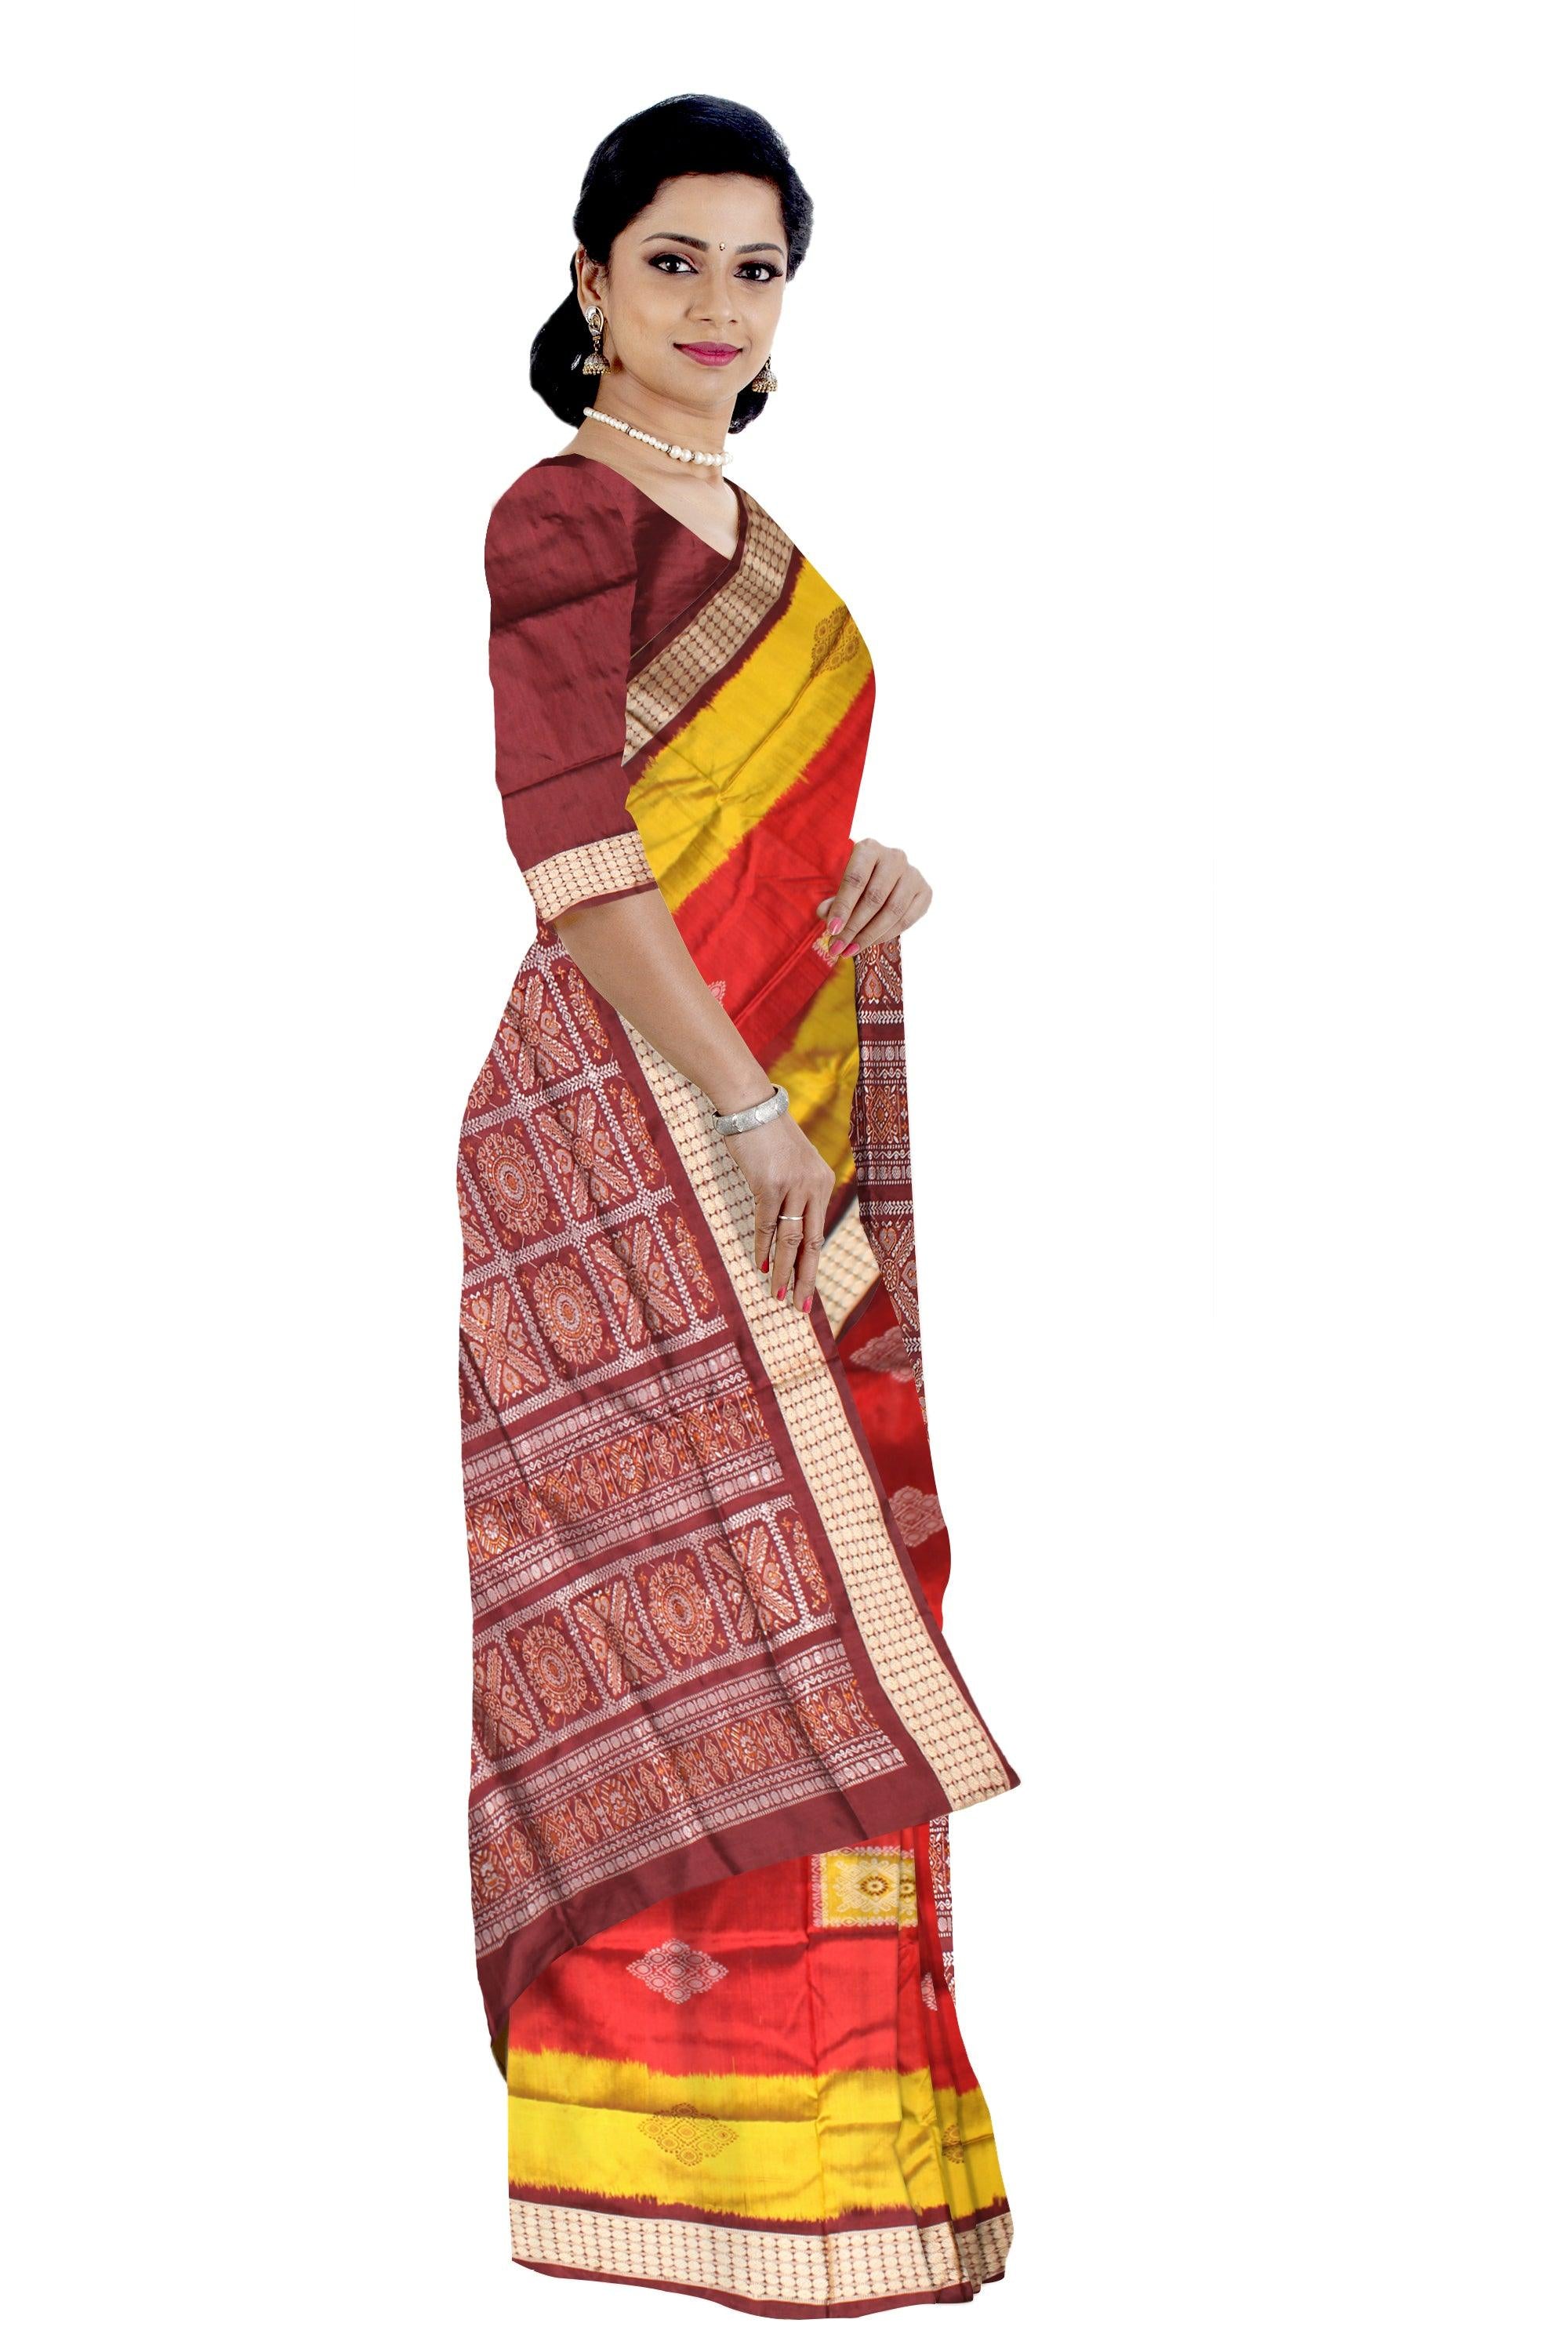 Sambalpuri Pata Saree in Maroon and Yellow  Color in box design with Silver color Border with blouse piece. - Koshali Arts & Crafts Enterprise